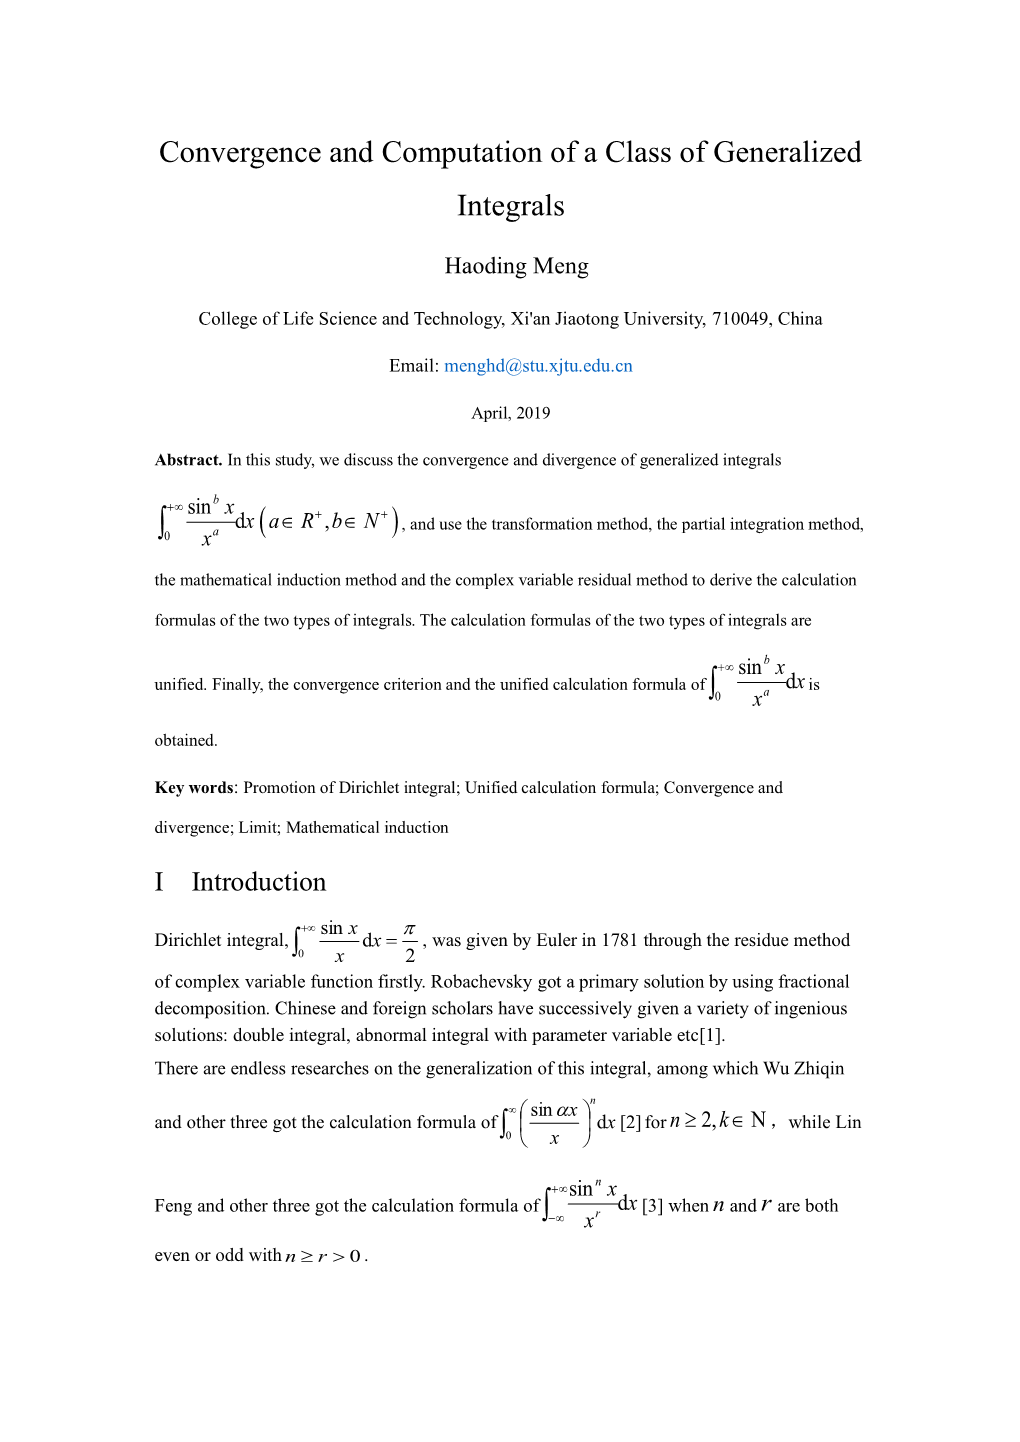 Convergence and Computation of a Class of Generalized Integrals